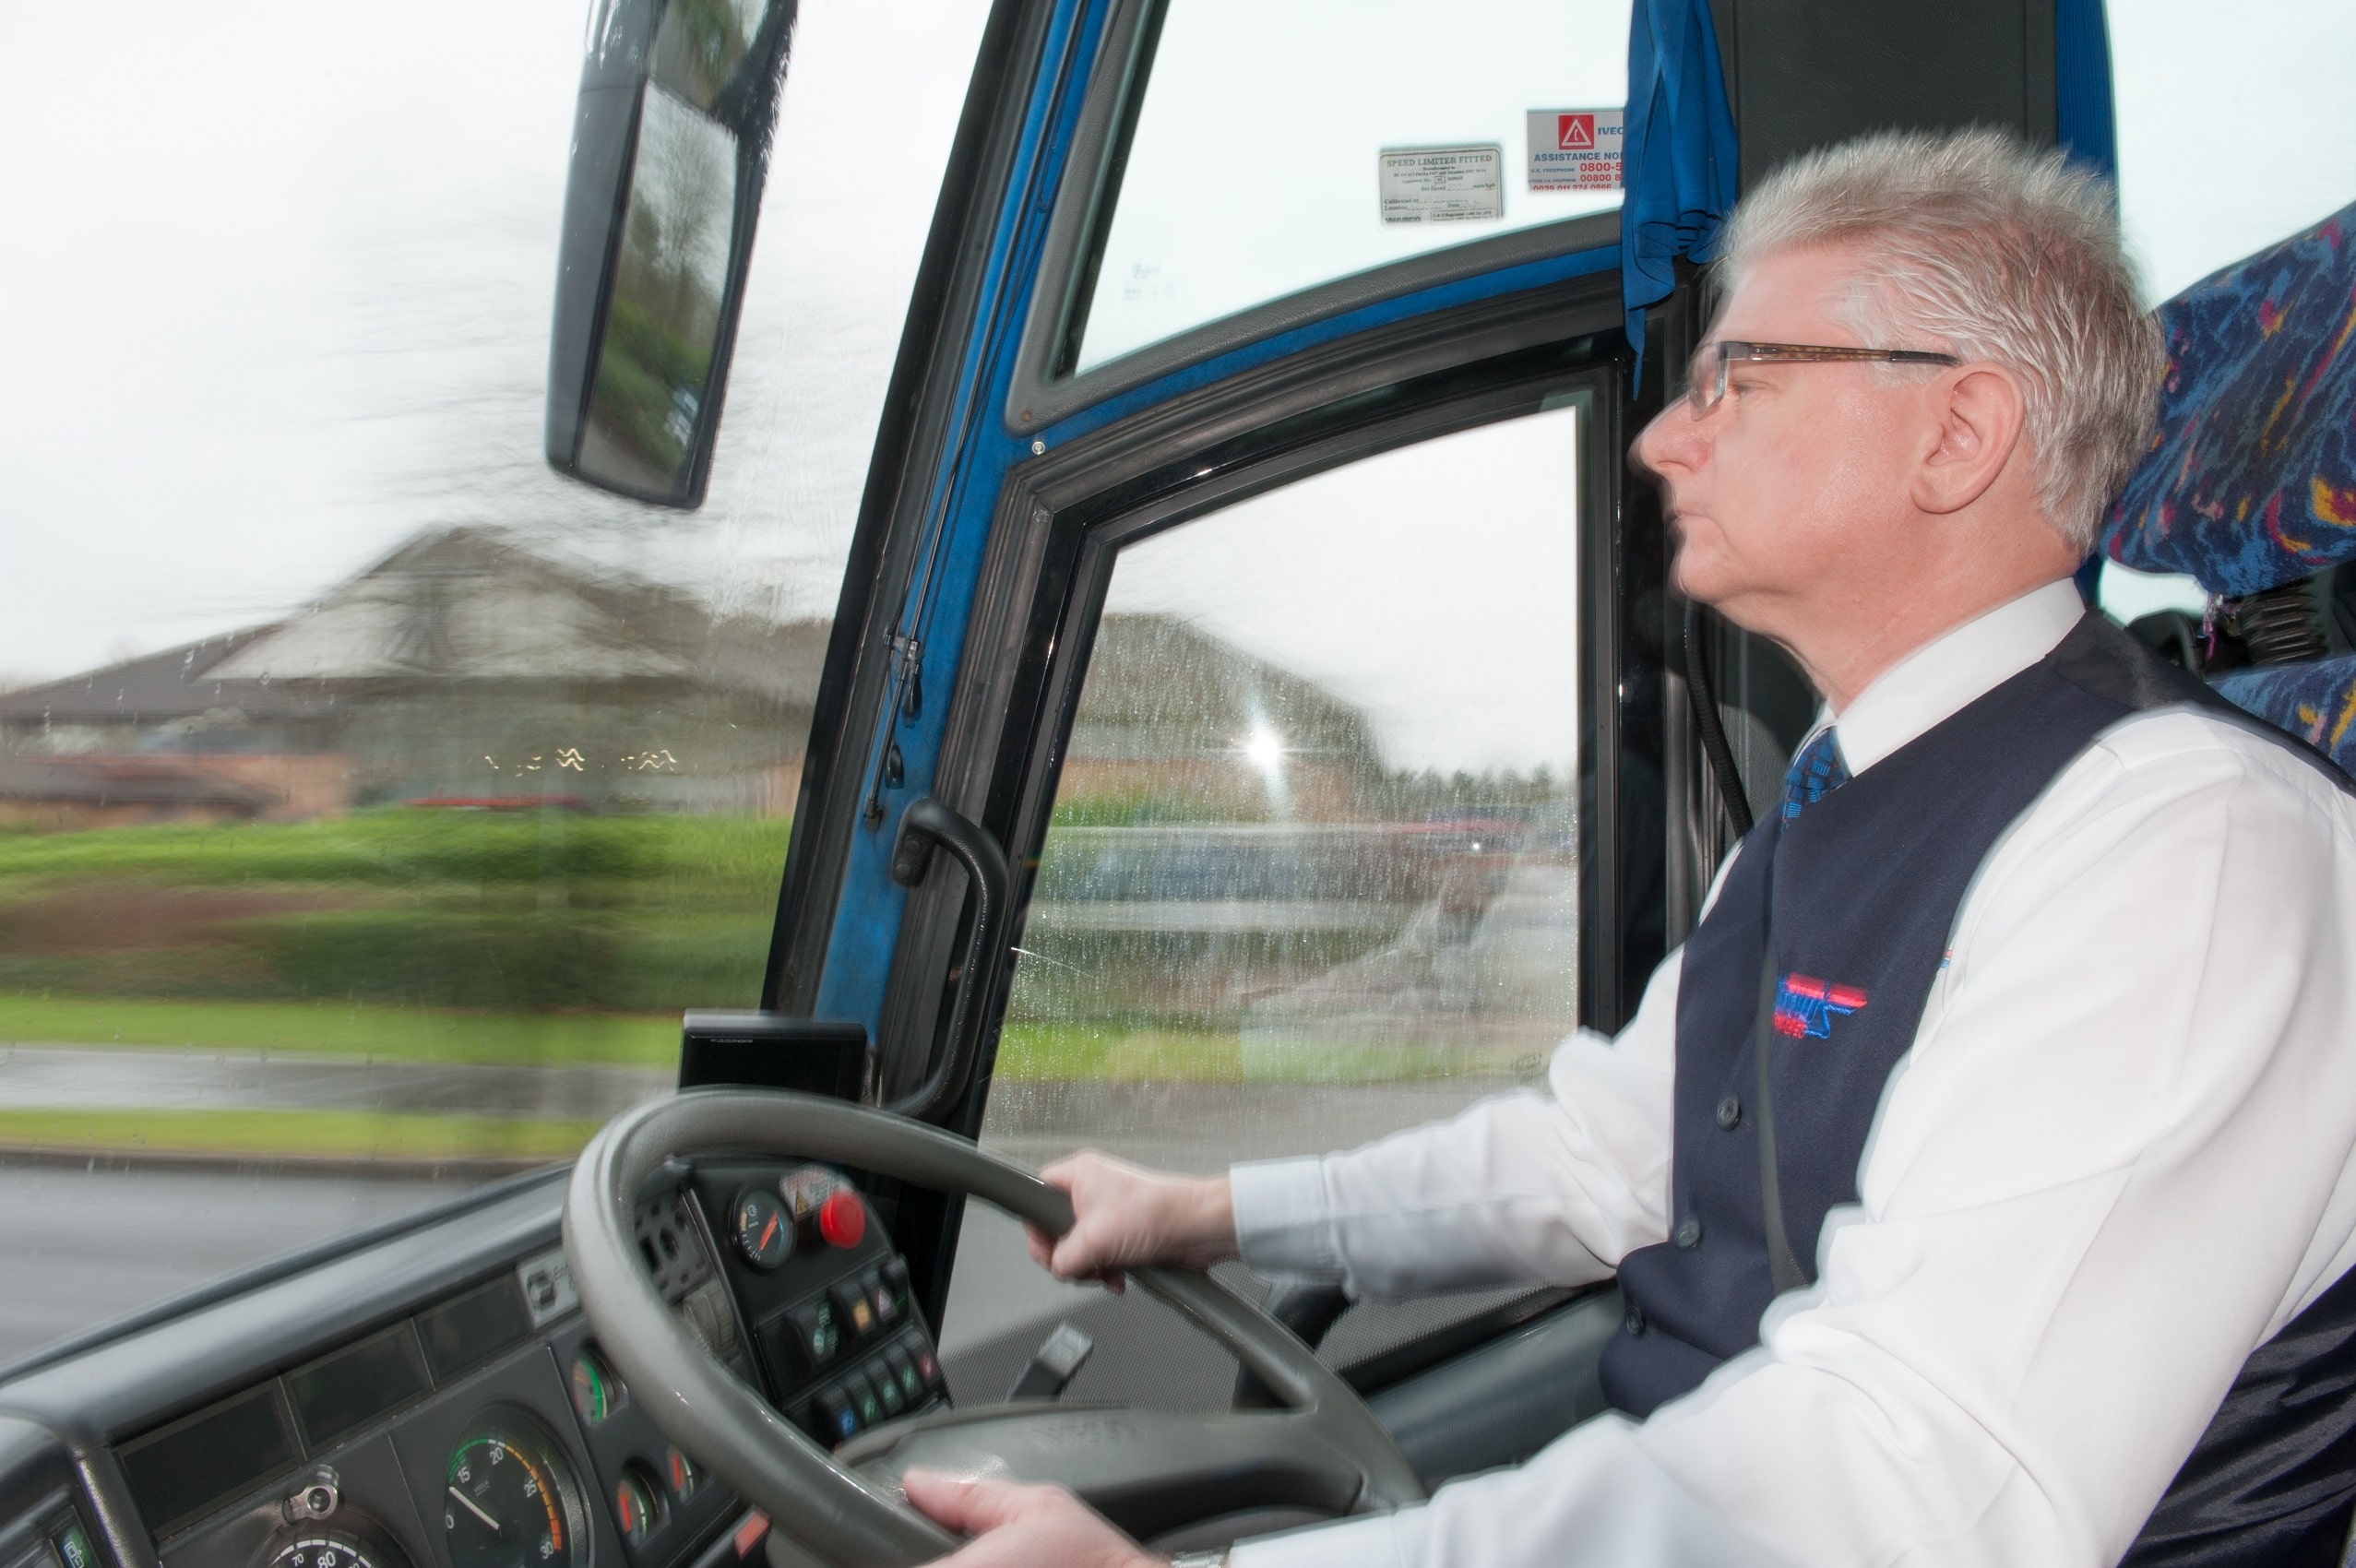 Coach and bus driver resource availability